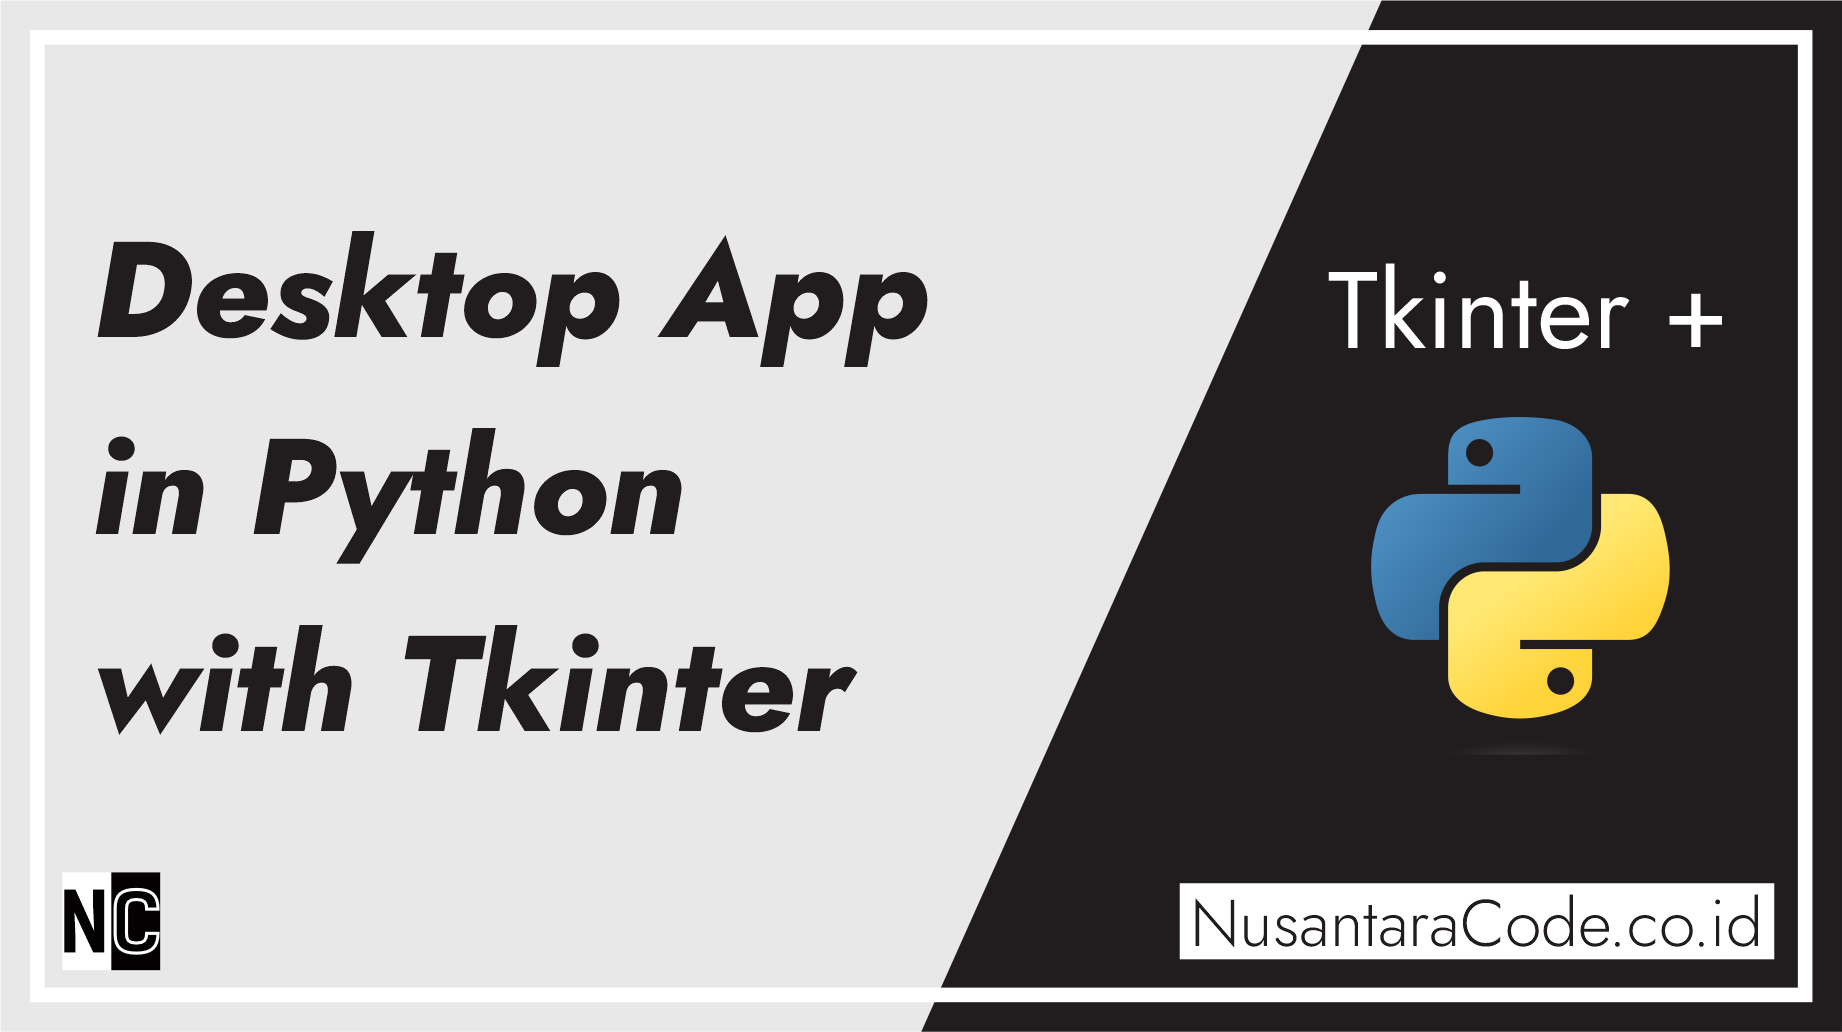 Building Your First Desktop App in Python with Tkinter